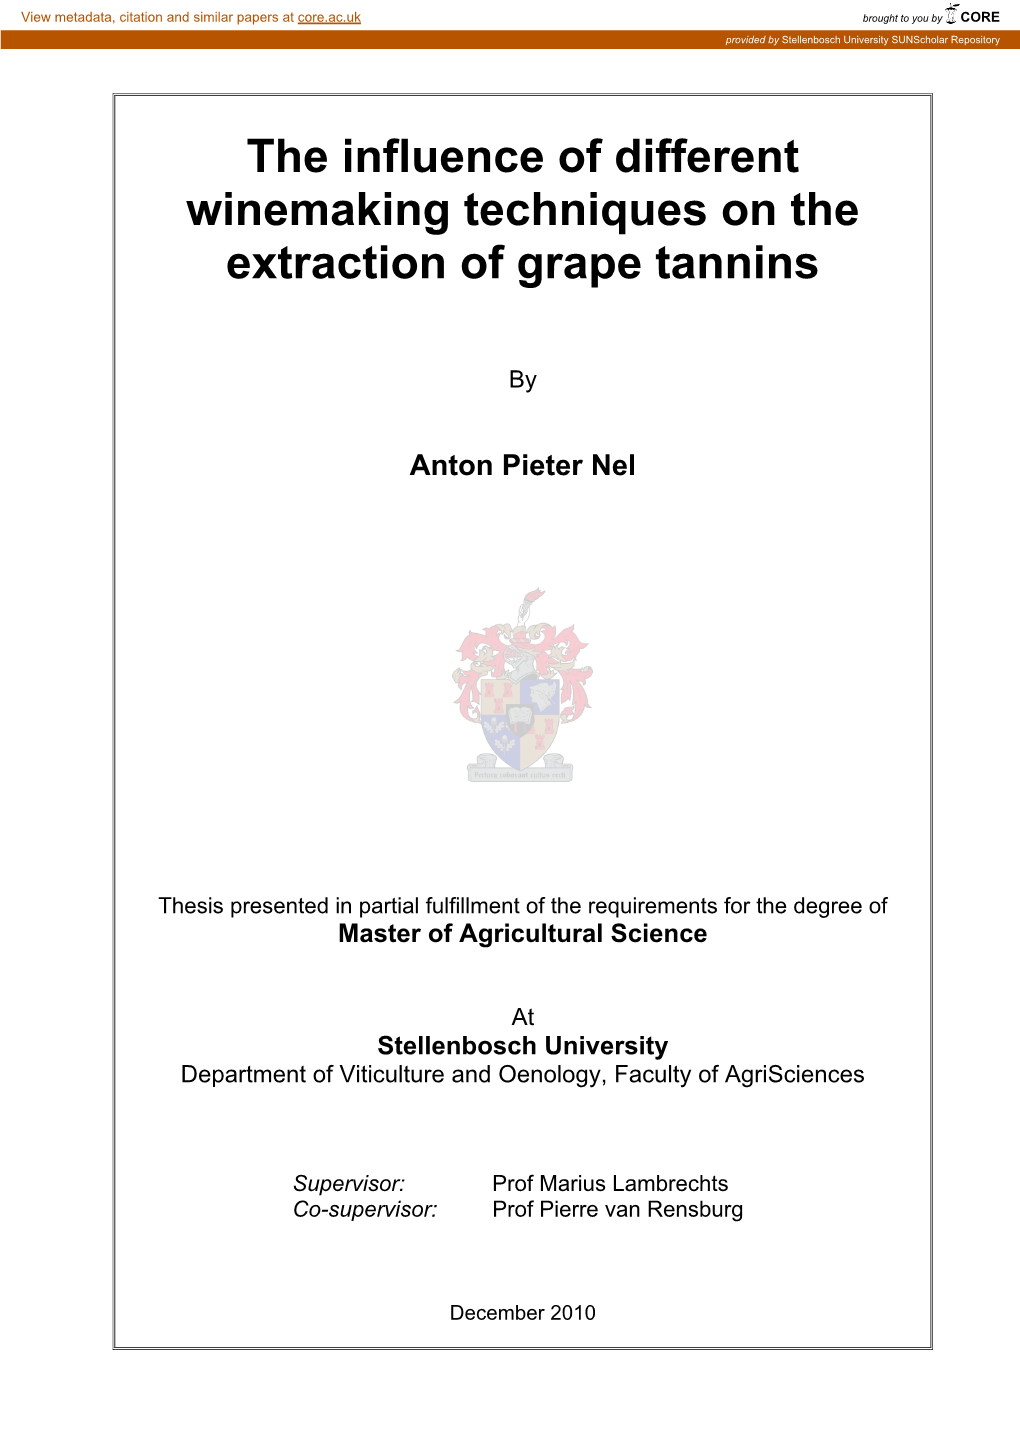 The Influence of Different Winemaking Techniques on the Extraction of Grape Tannins